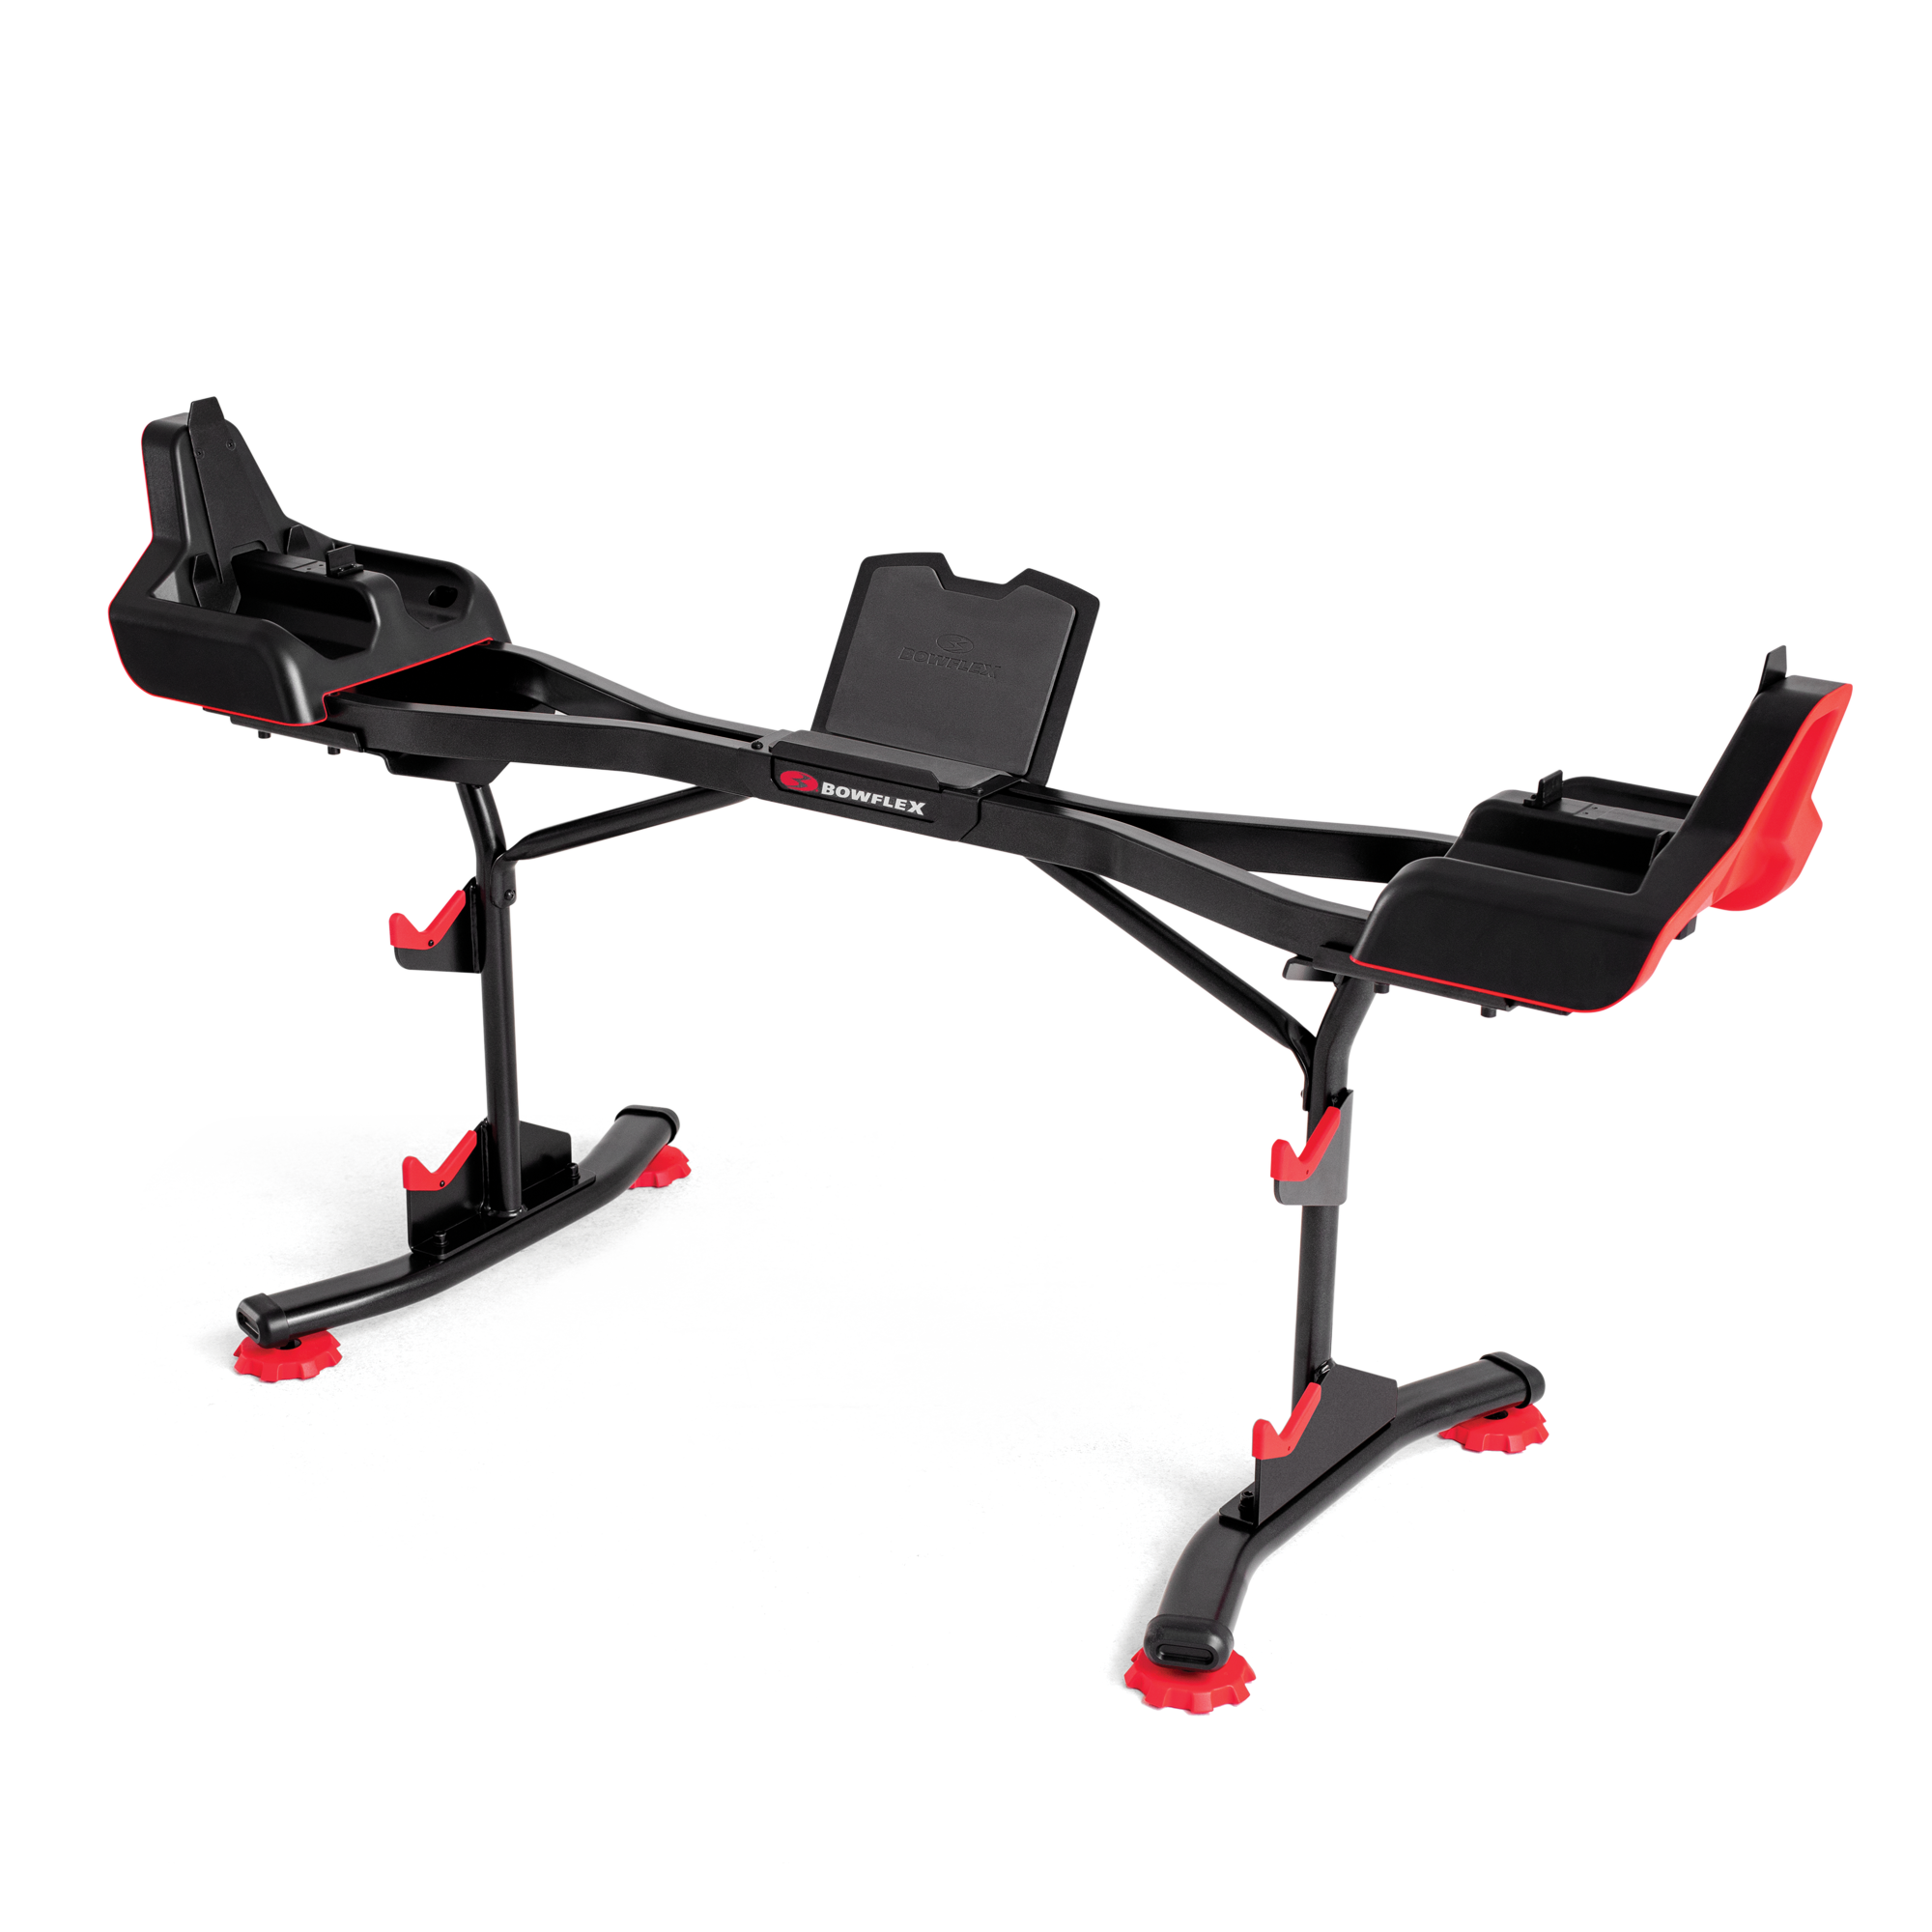 Bowflex SelectTech Stand with Media Rack for sale online 100584 